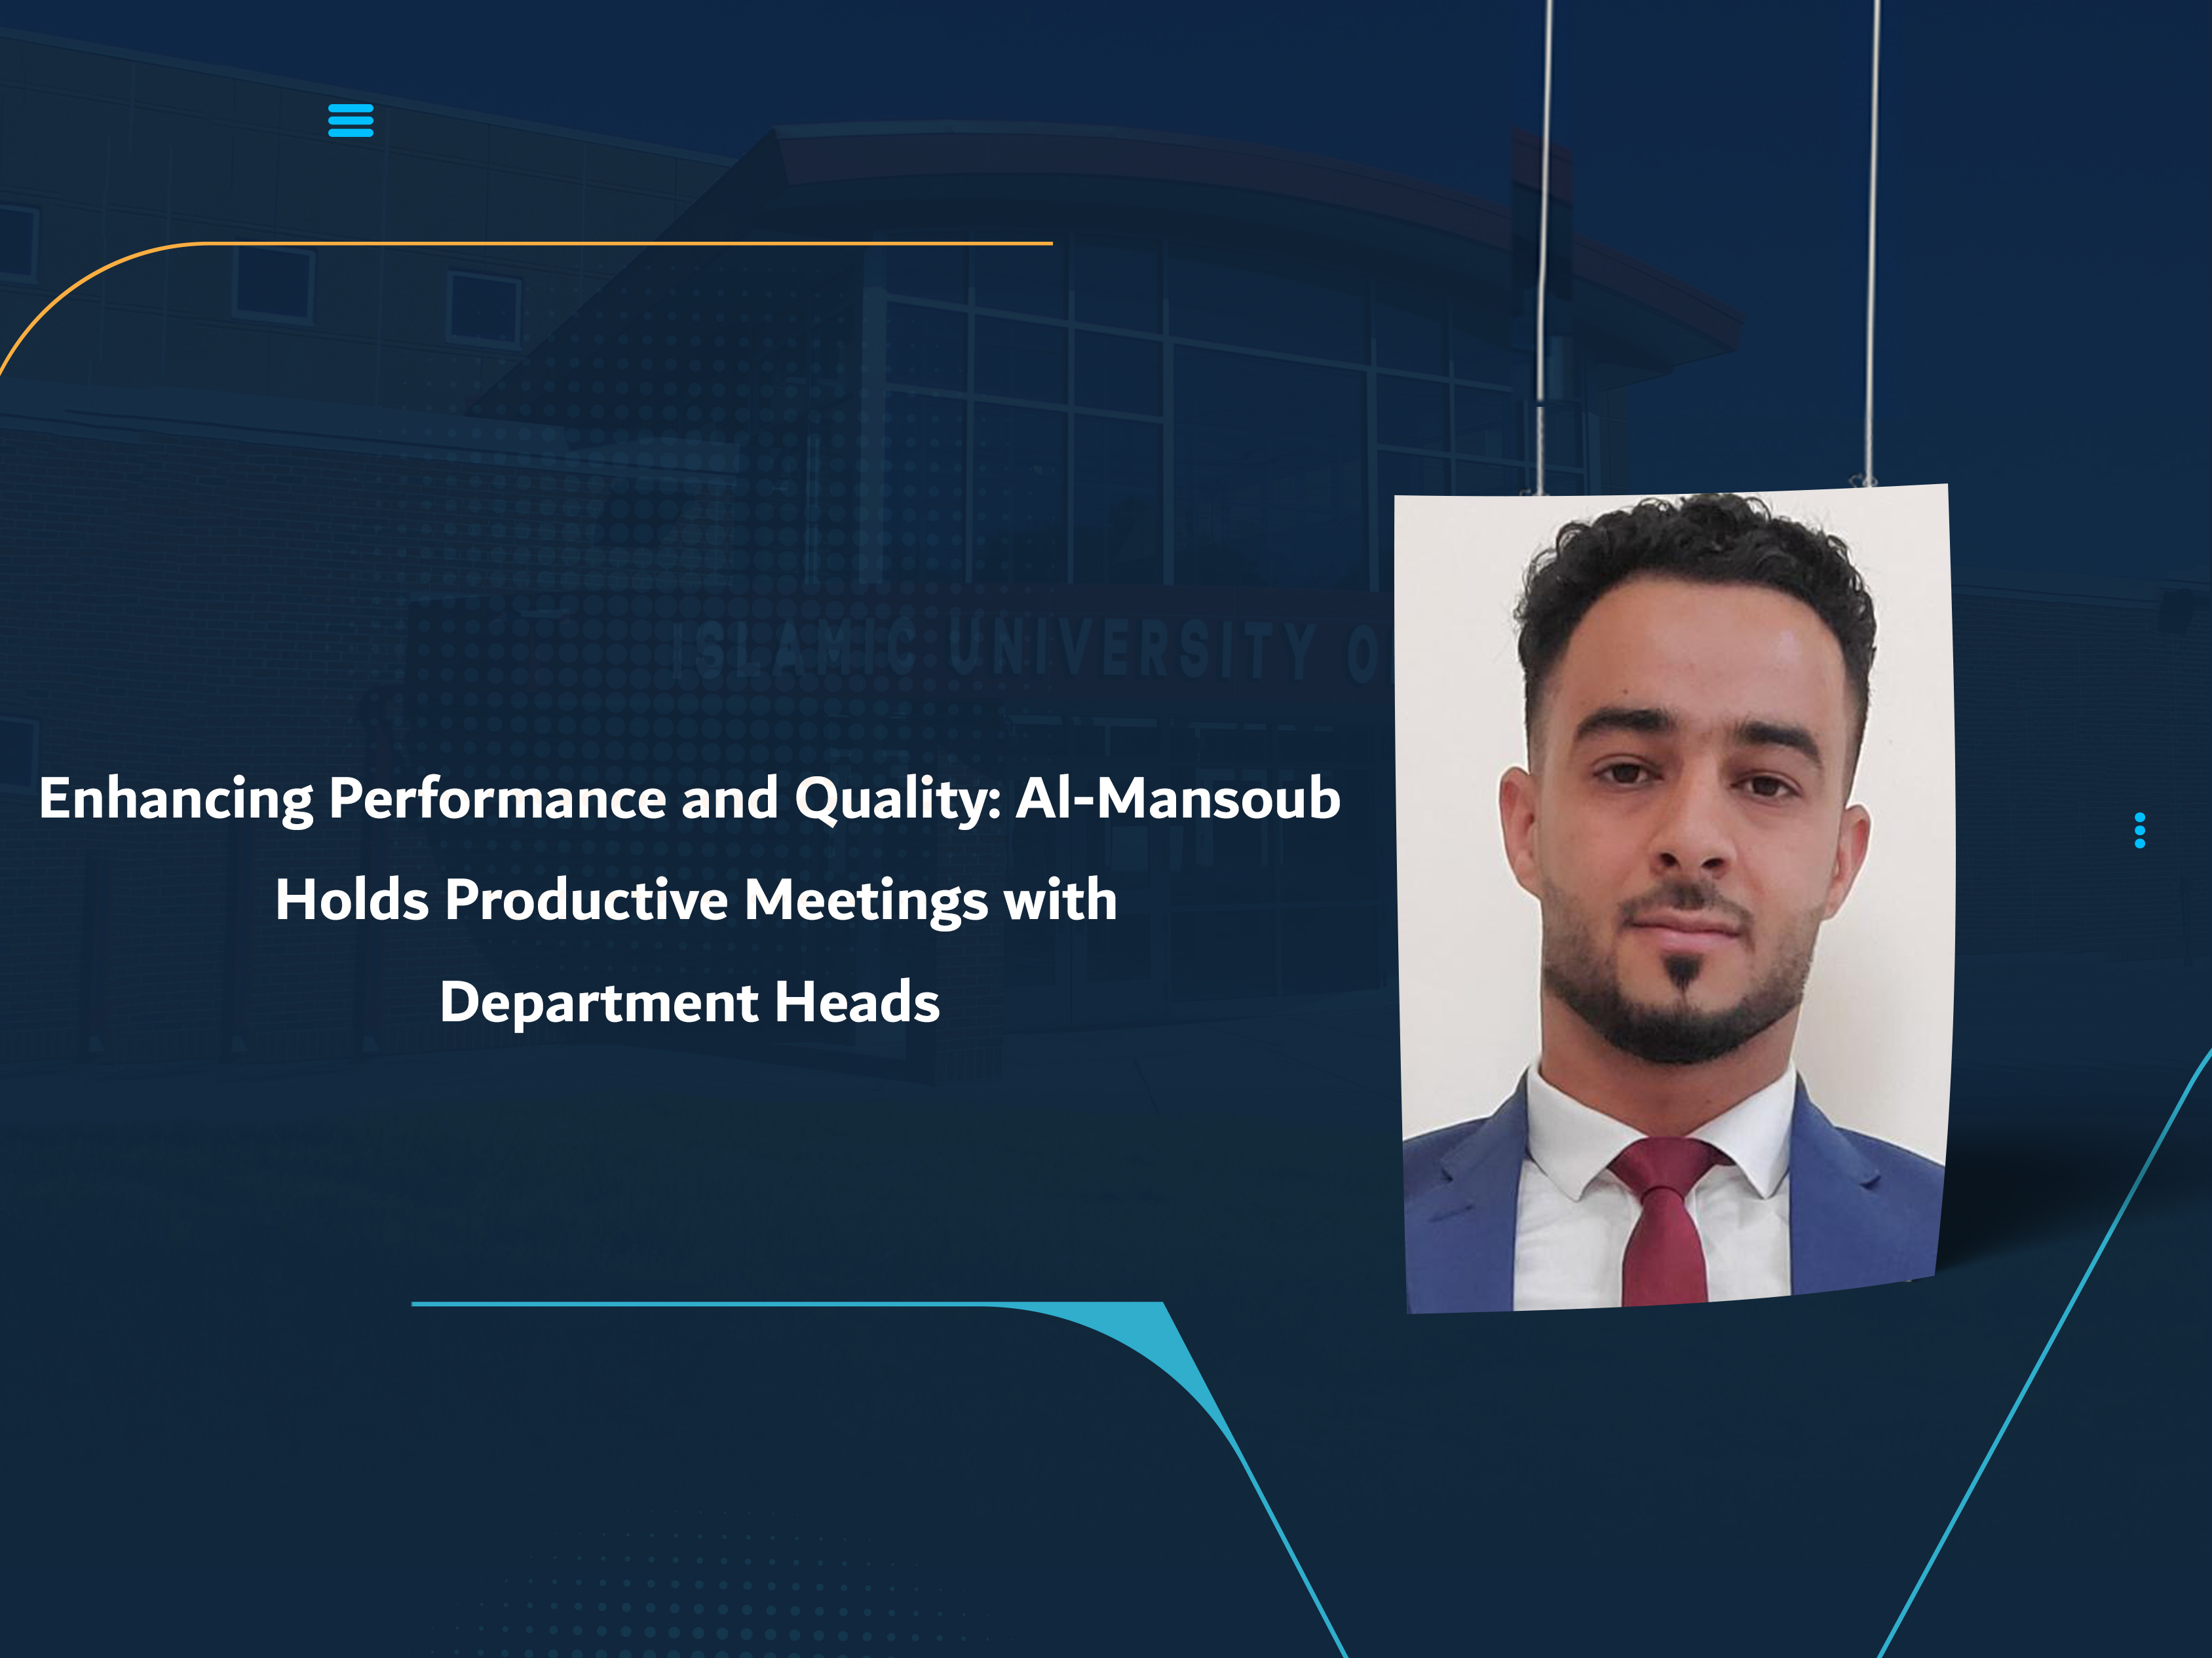 Enhancing Performance and Quality: Al-Mansoub Holds Productive Meetings with Department Heads